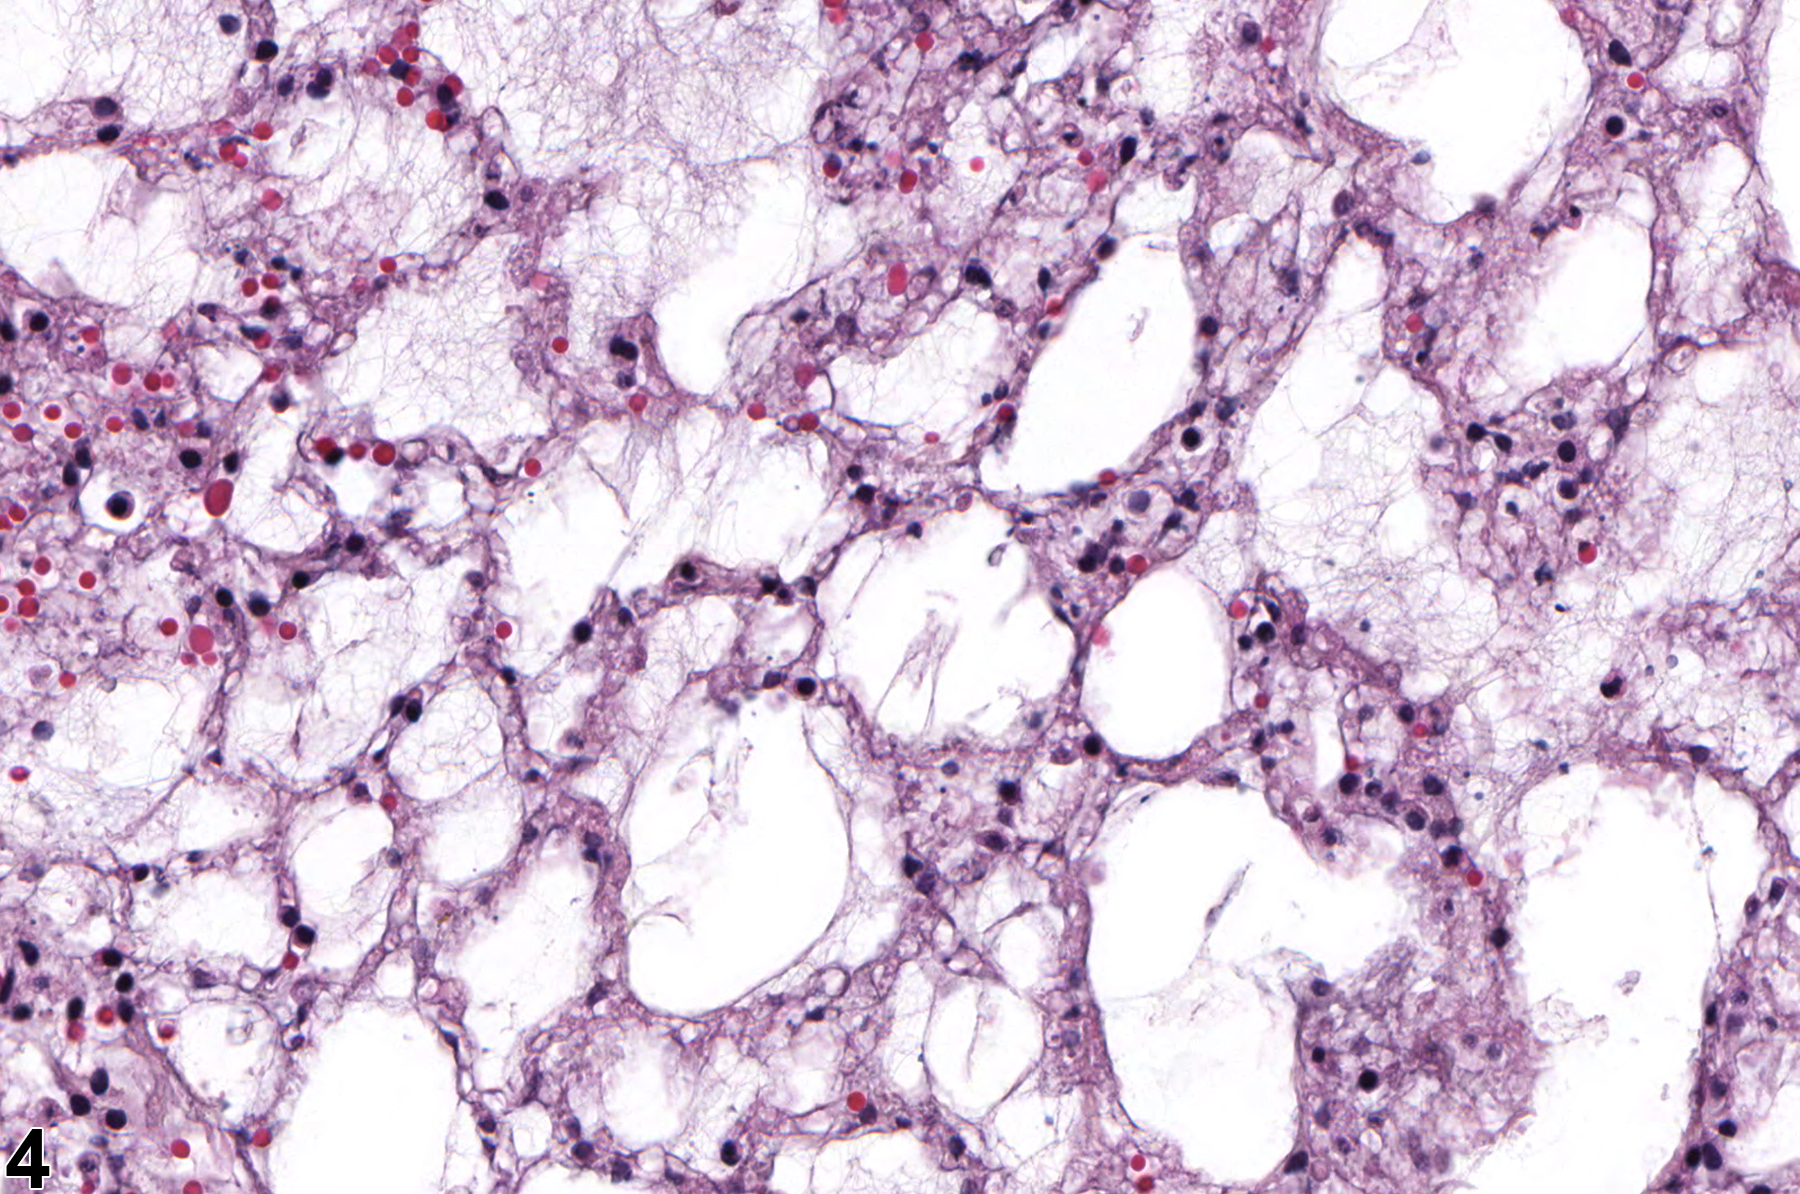 Image of epithelial necrosis in the lung from a female F344/N rat in a subchronic study